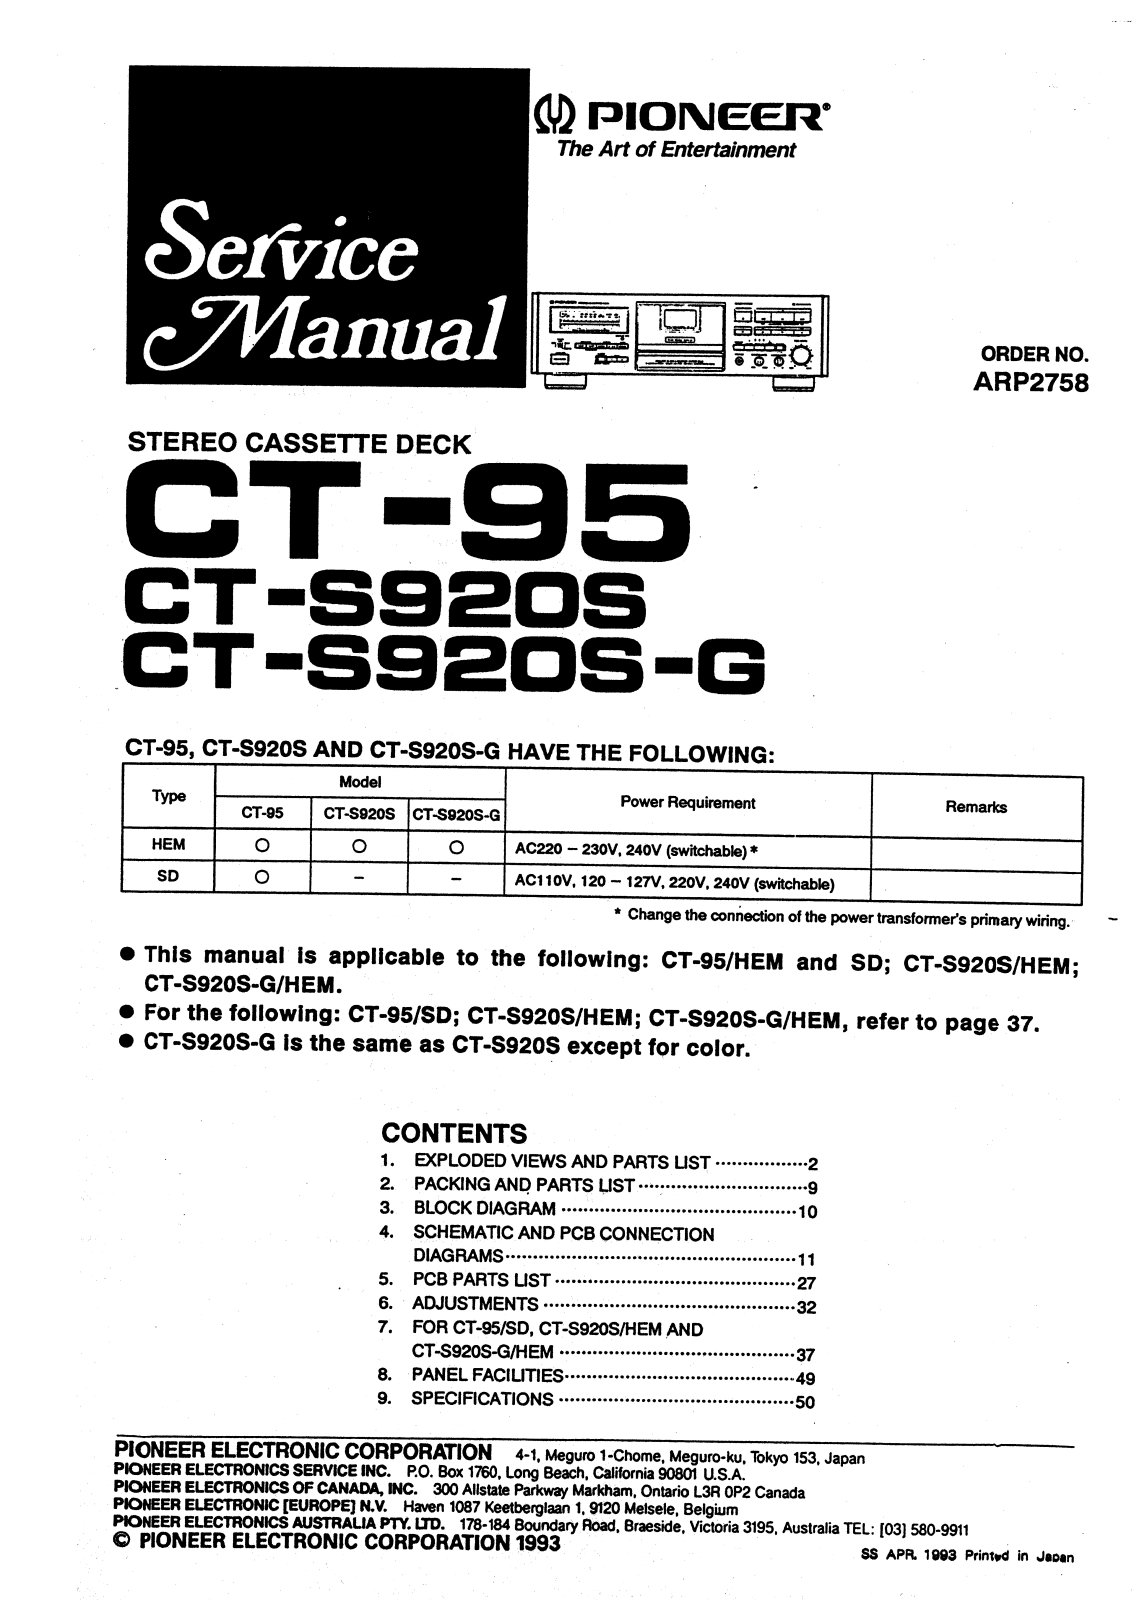 Pioneer CT-95, CTS-920-S, CTS-920-SG Service manual